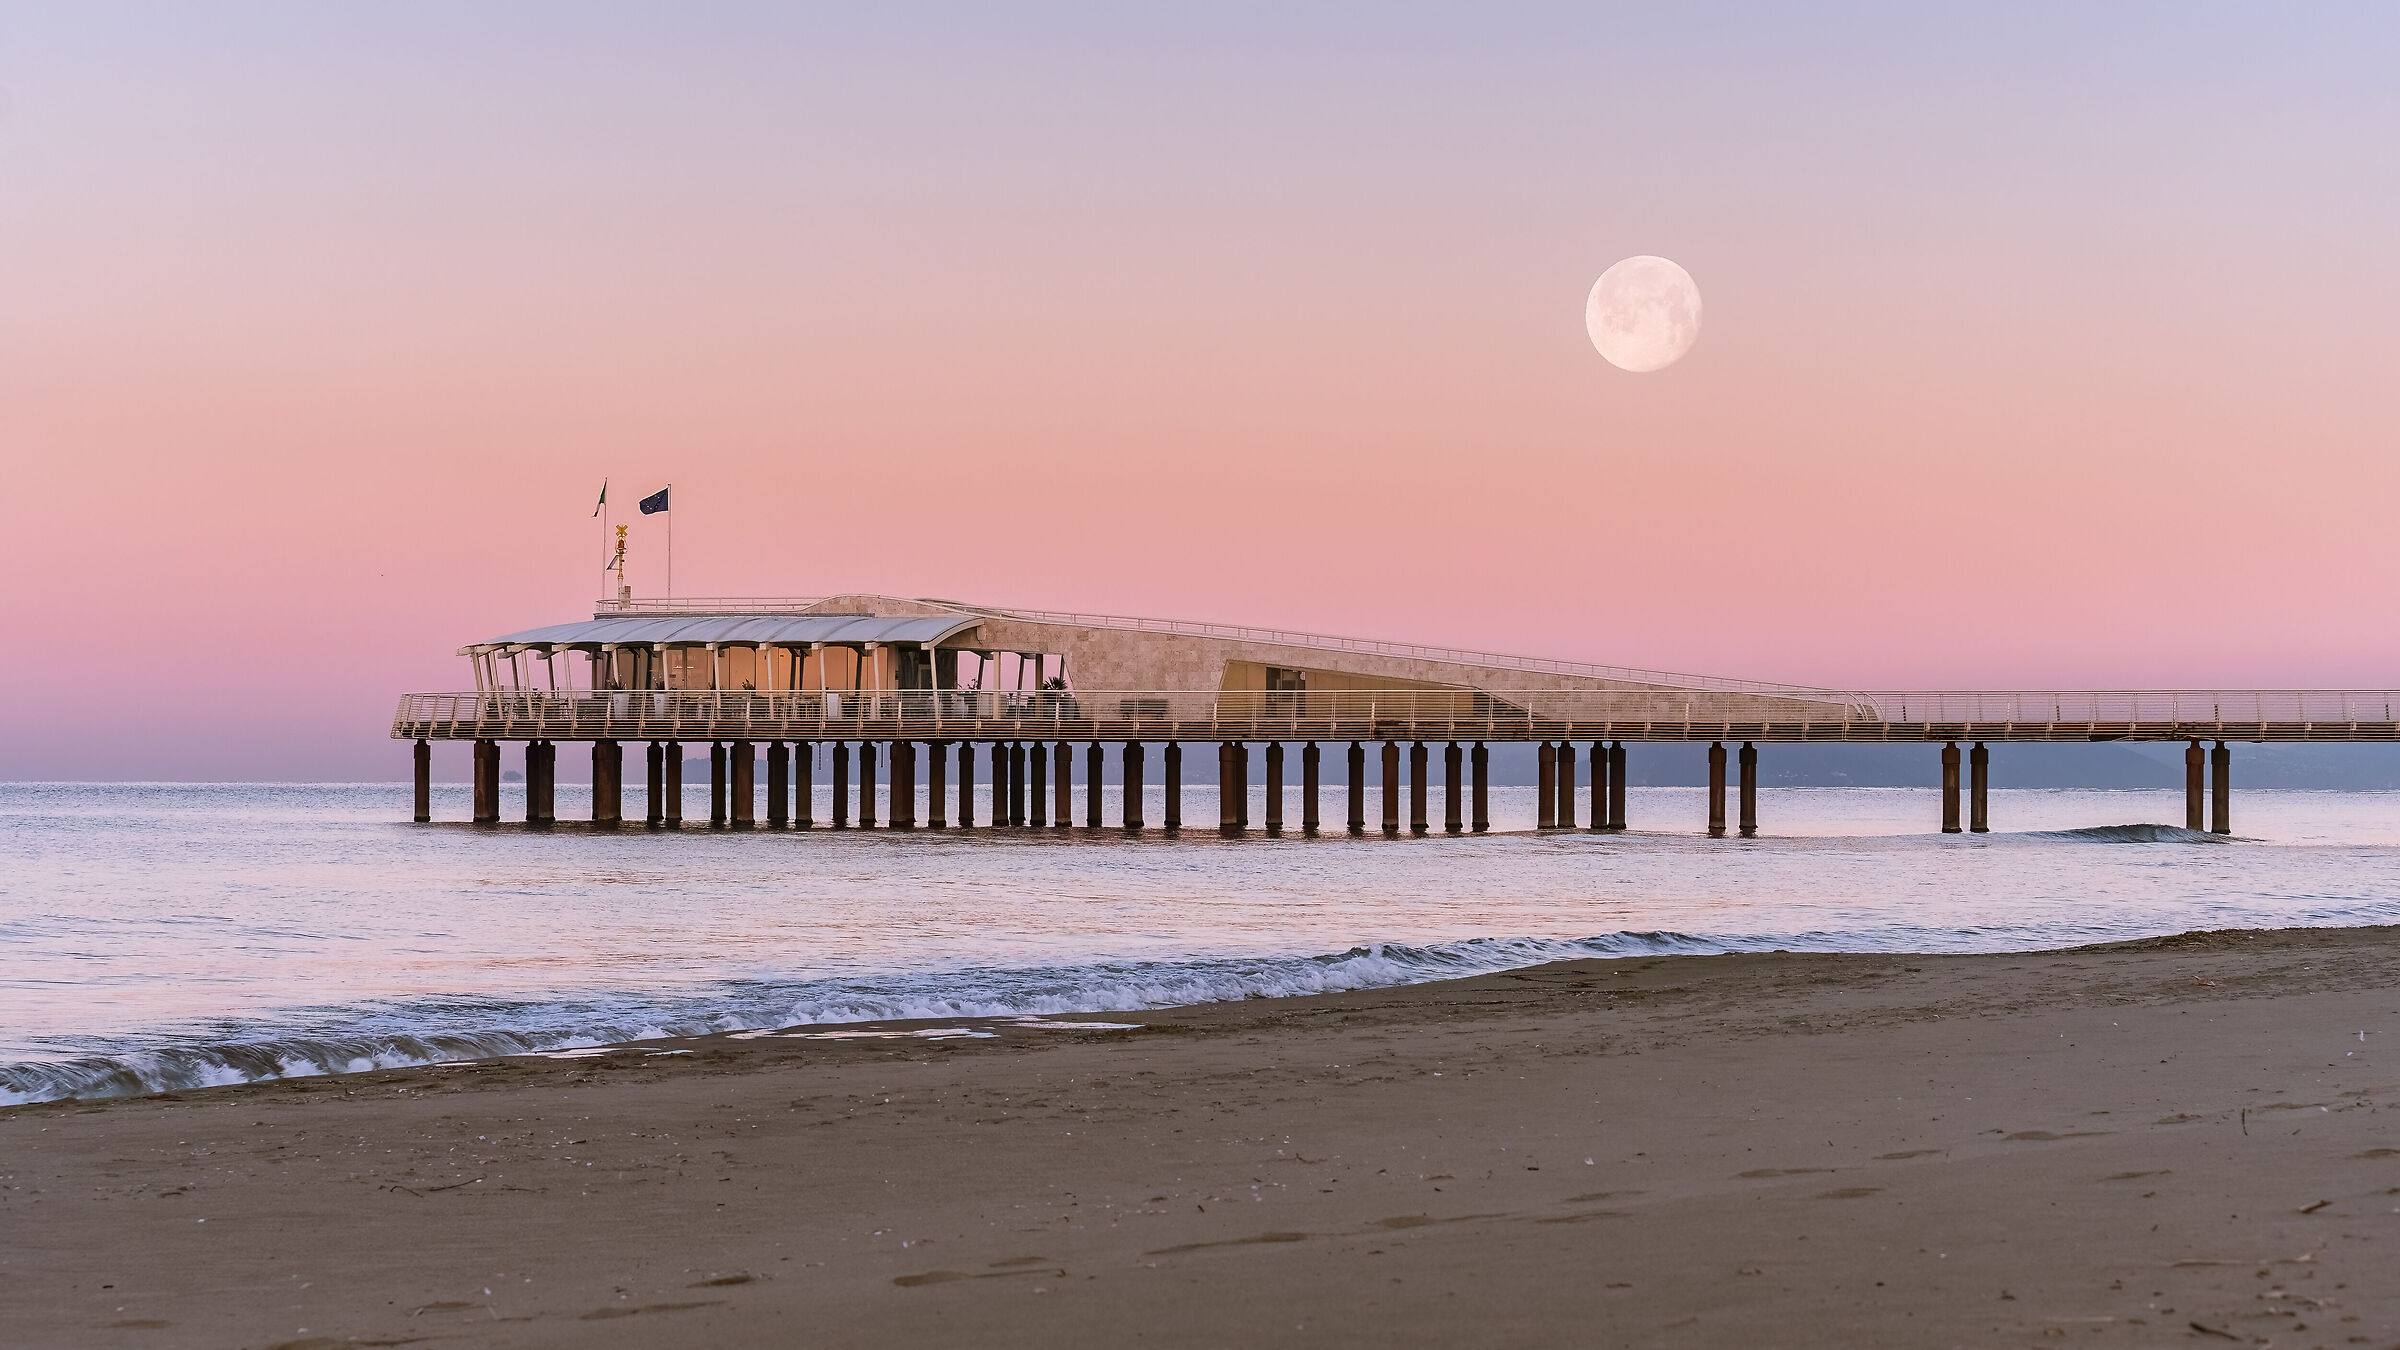 The moon on the pier ...